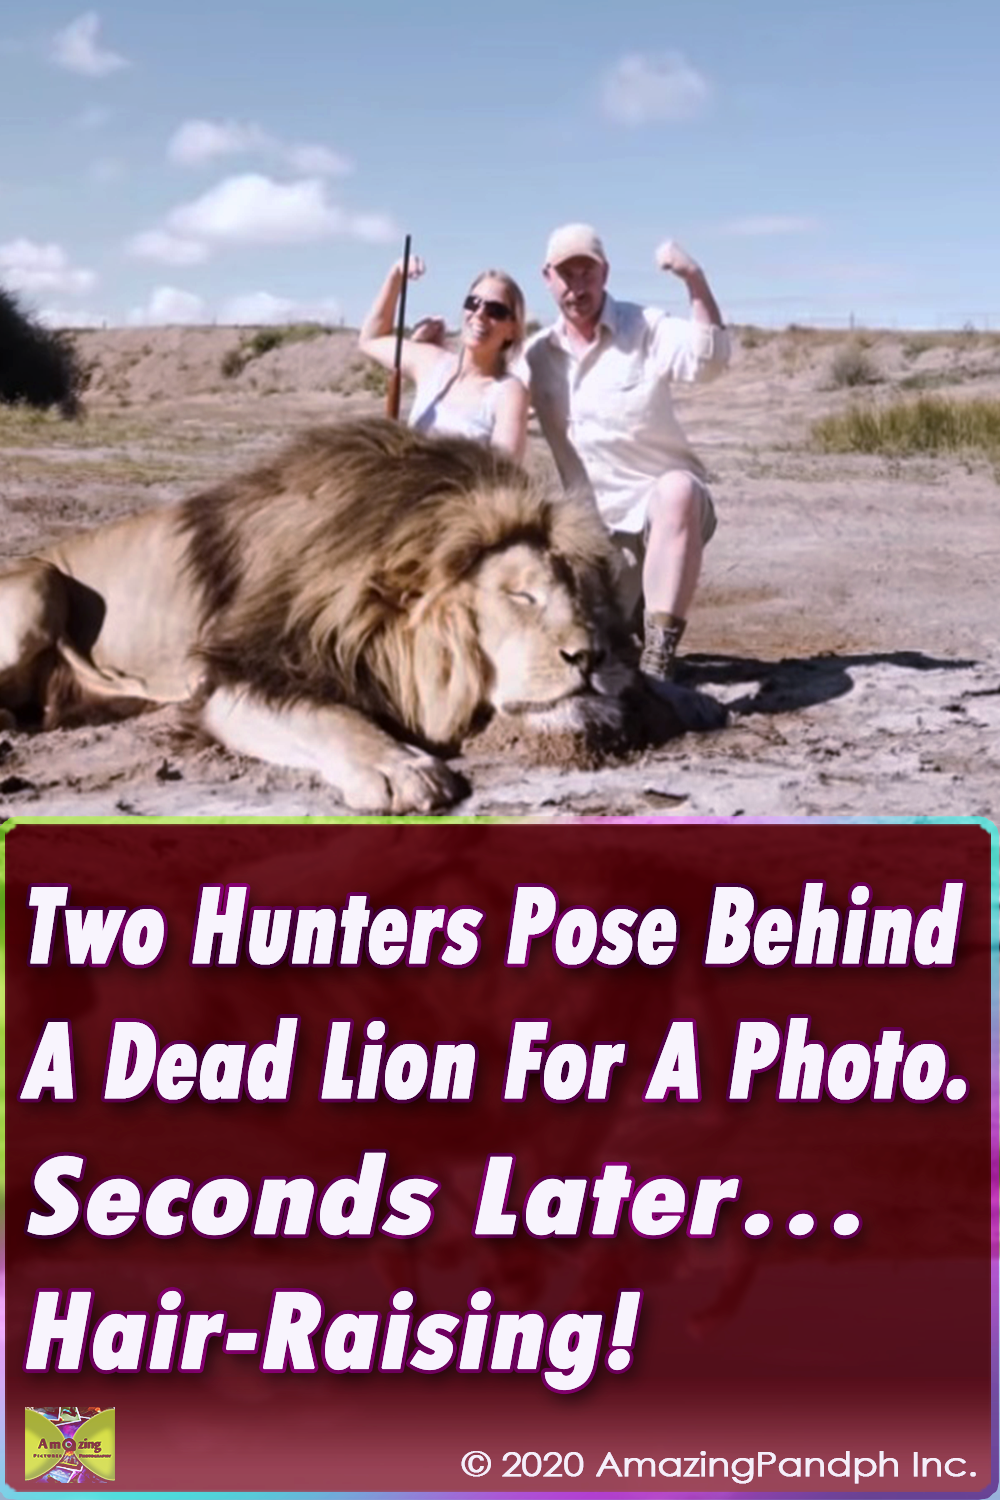 viral video,lionhunters,most viewed,video,viral,best of,most shared,best of,so dangerous,dangerous videos,dangerous animals in video,animals,lion,wildlife,hunters,best tools for hunters,video for hunters,best hunting video